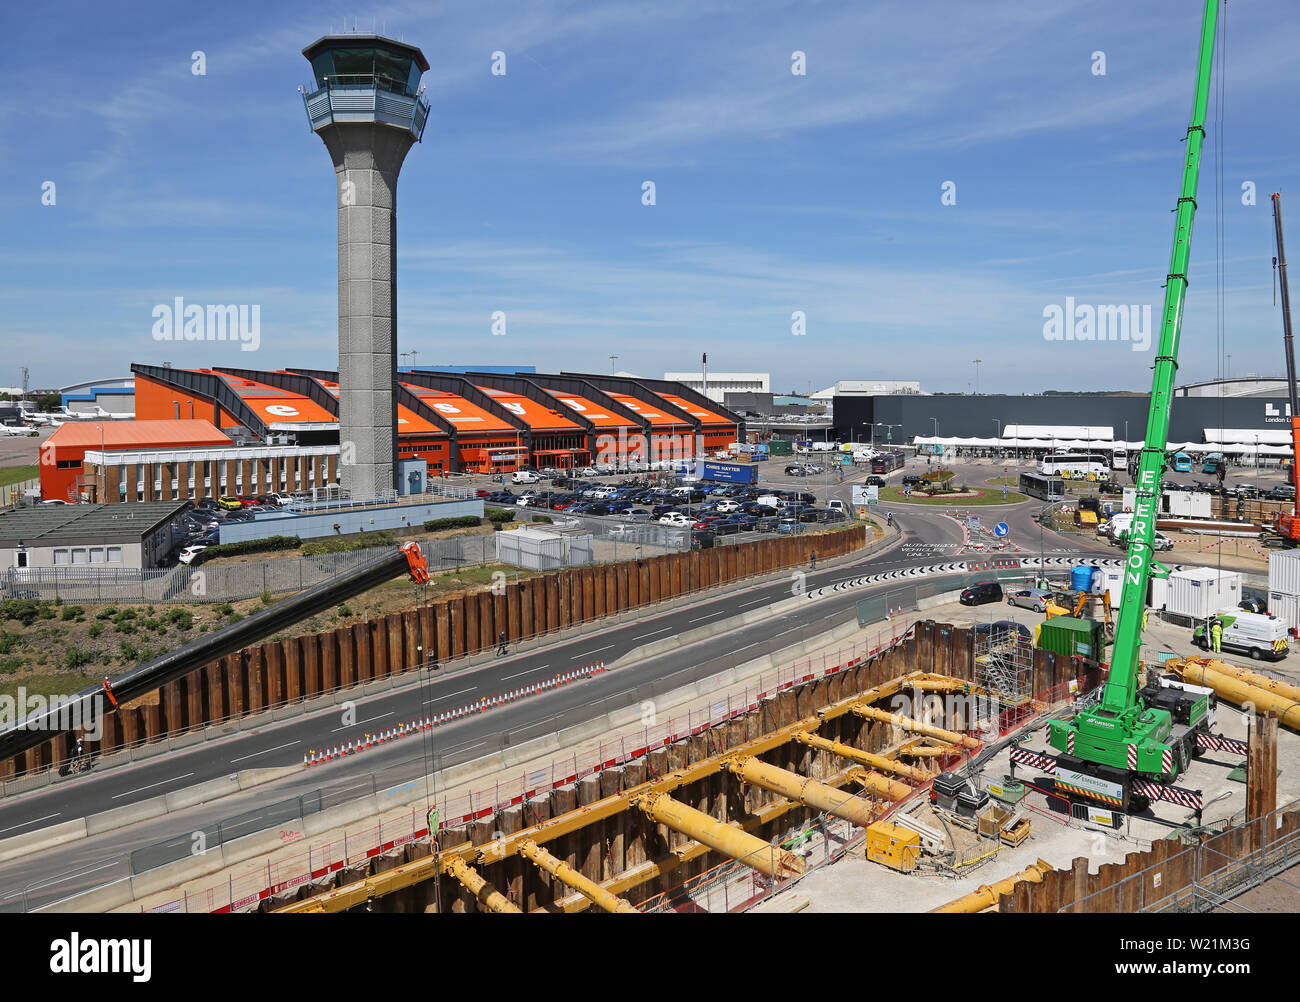 London Luton Airport, central area showing Easyjet Head Office, control tower and excavation for the new DART rail link - due to open in 2021. Stock Photo